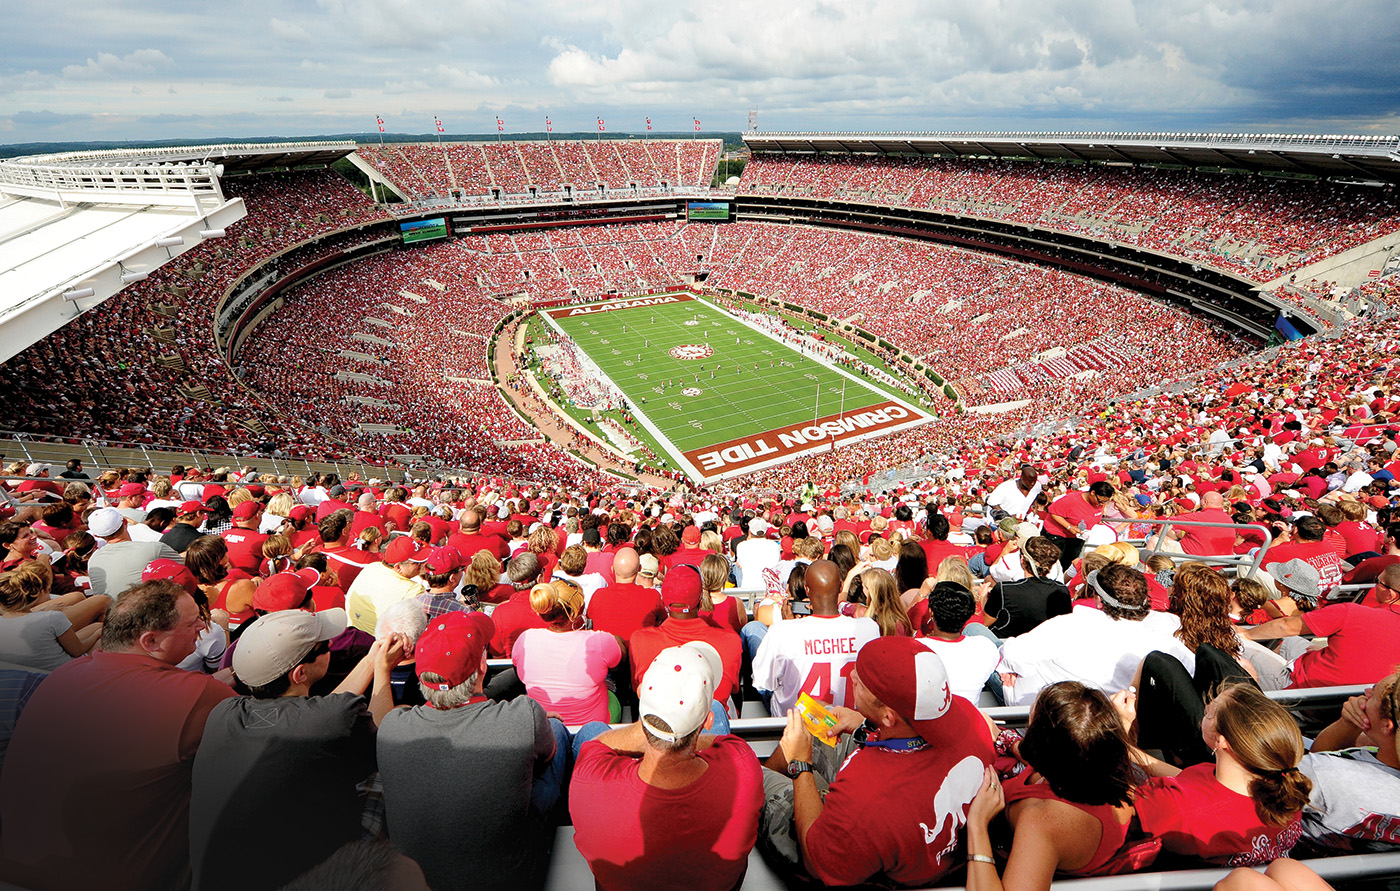 Stadium Is Home To The Alabama Crimson Tide Who Have Won National